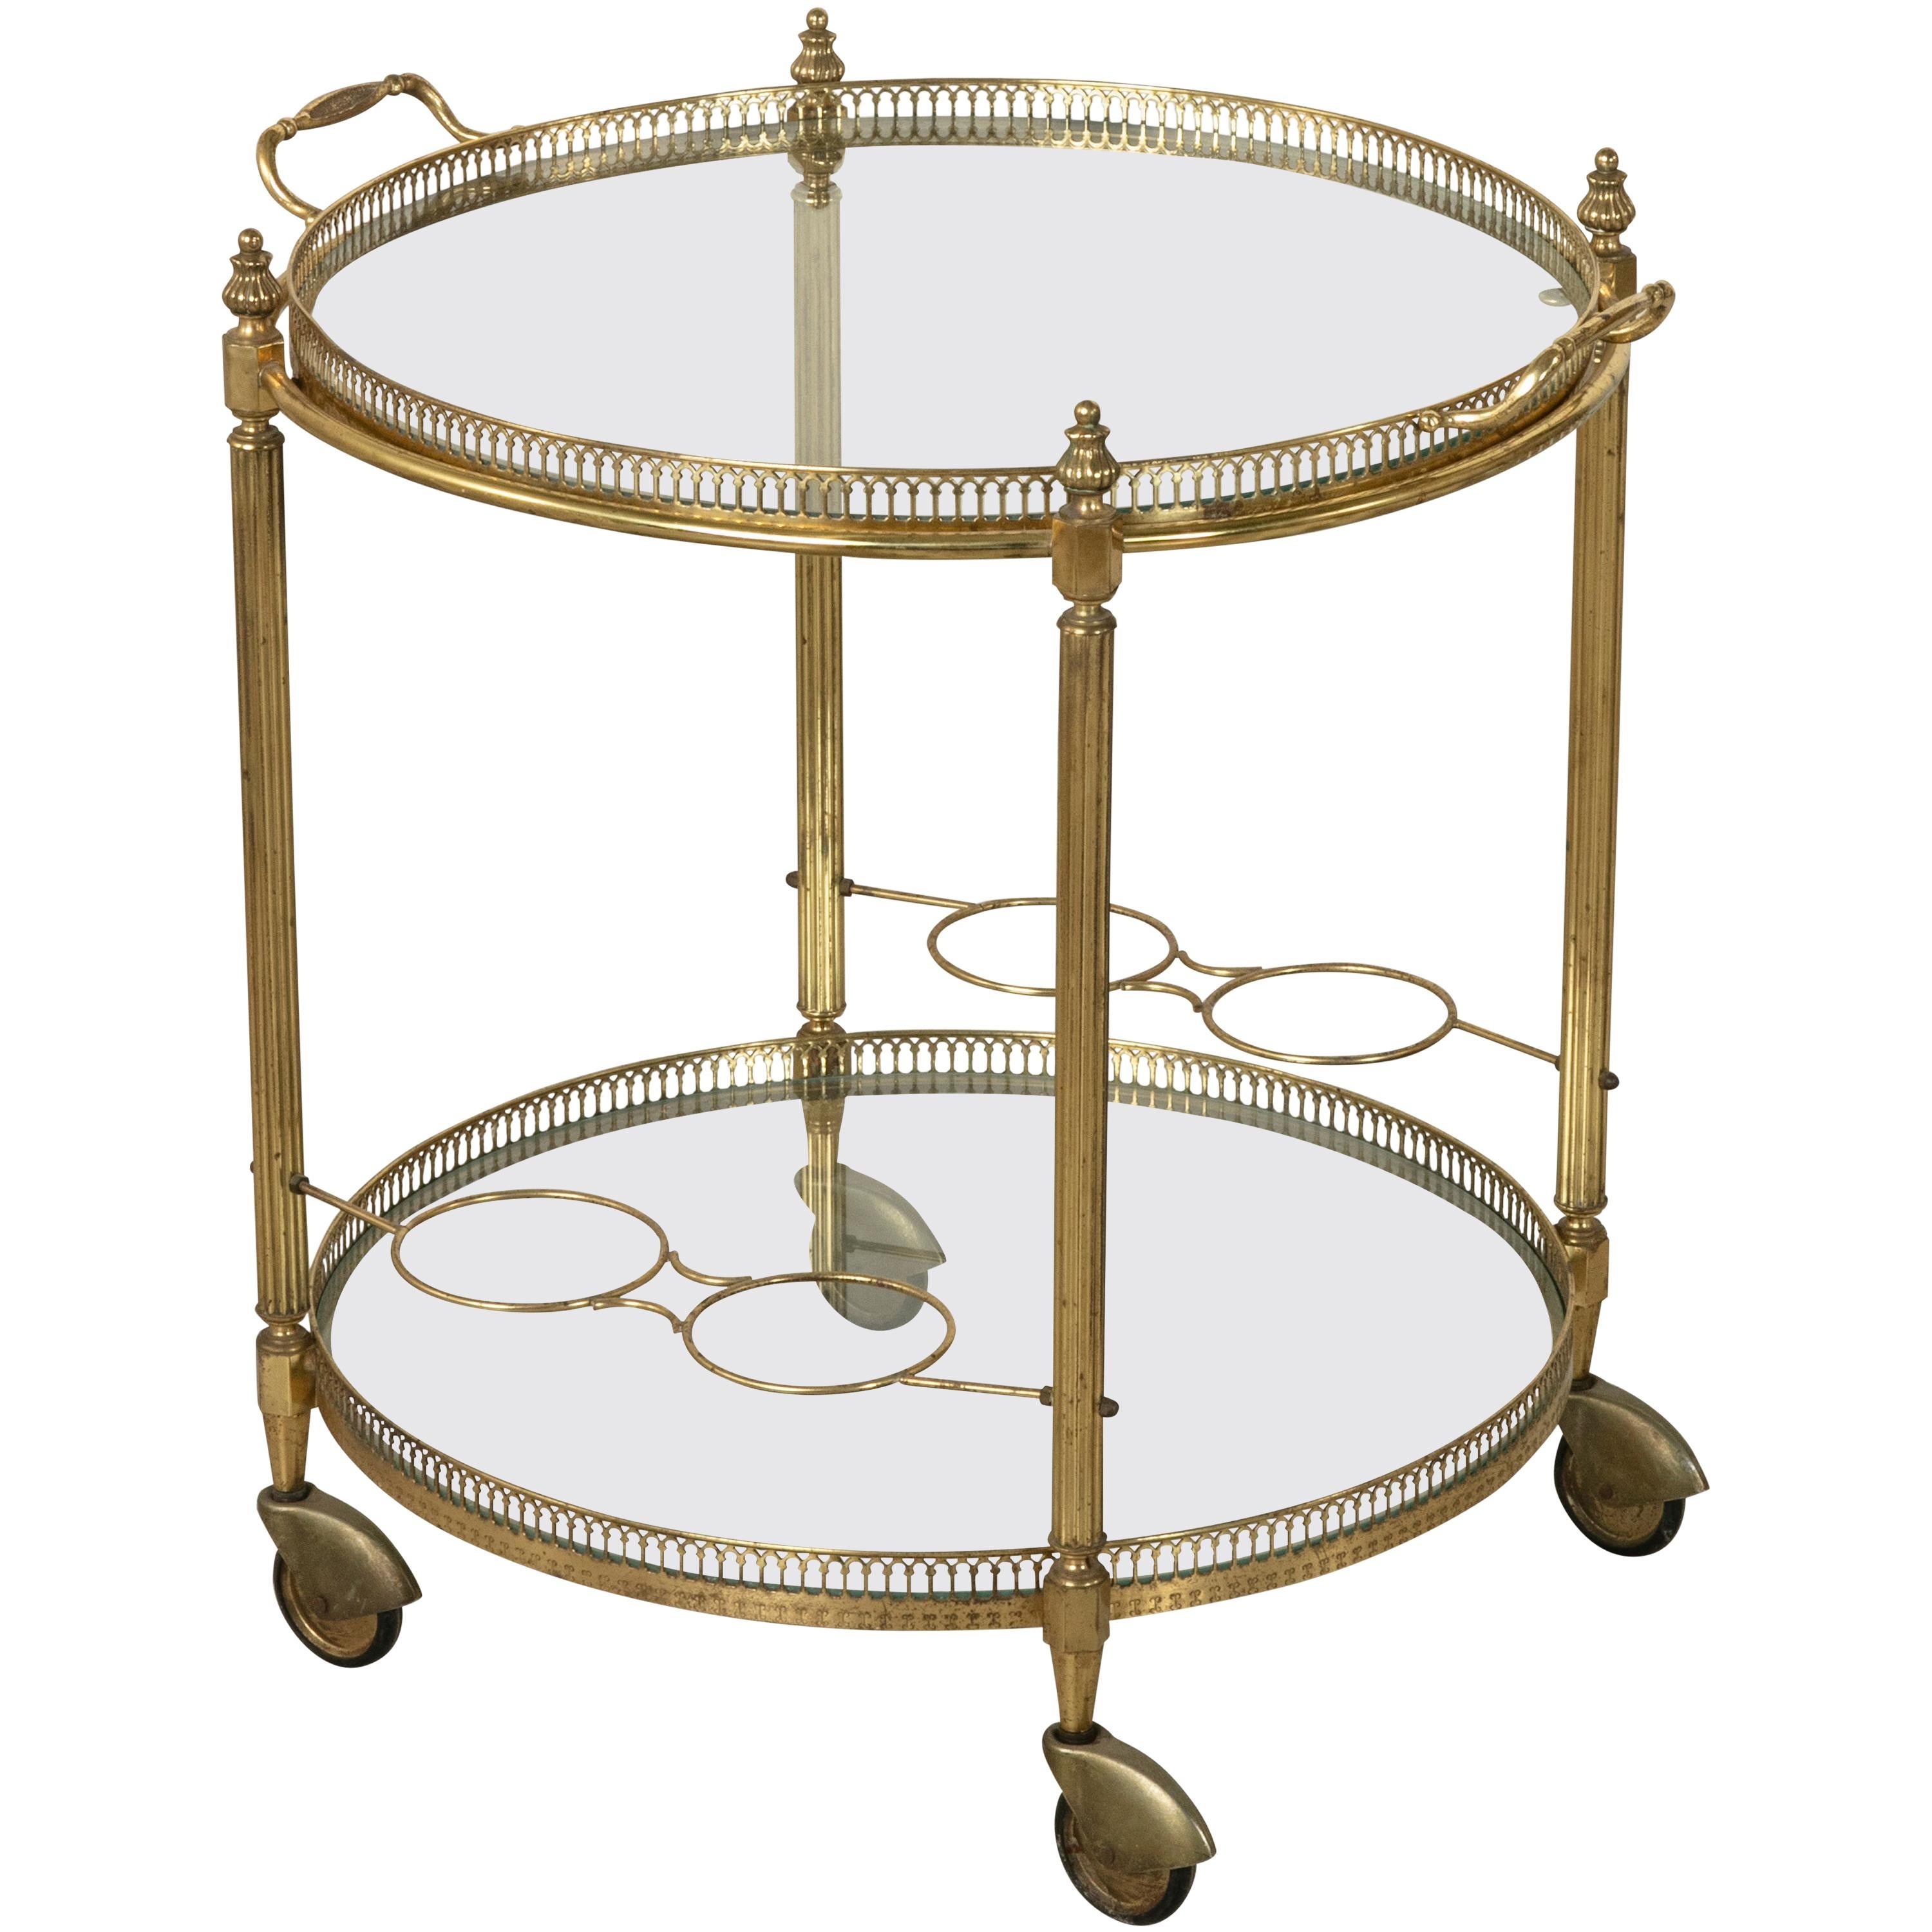 Mid-20th Century French Louis XVI Style Brass and Glass Bar Cart